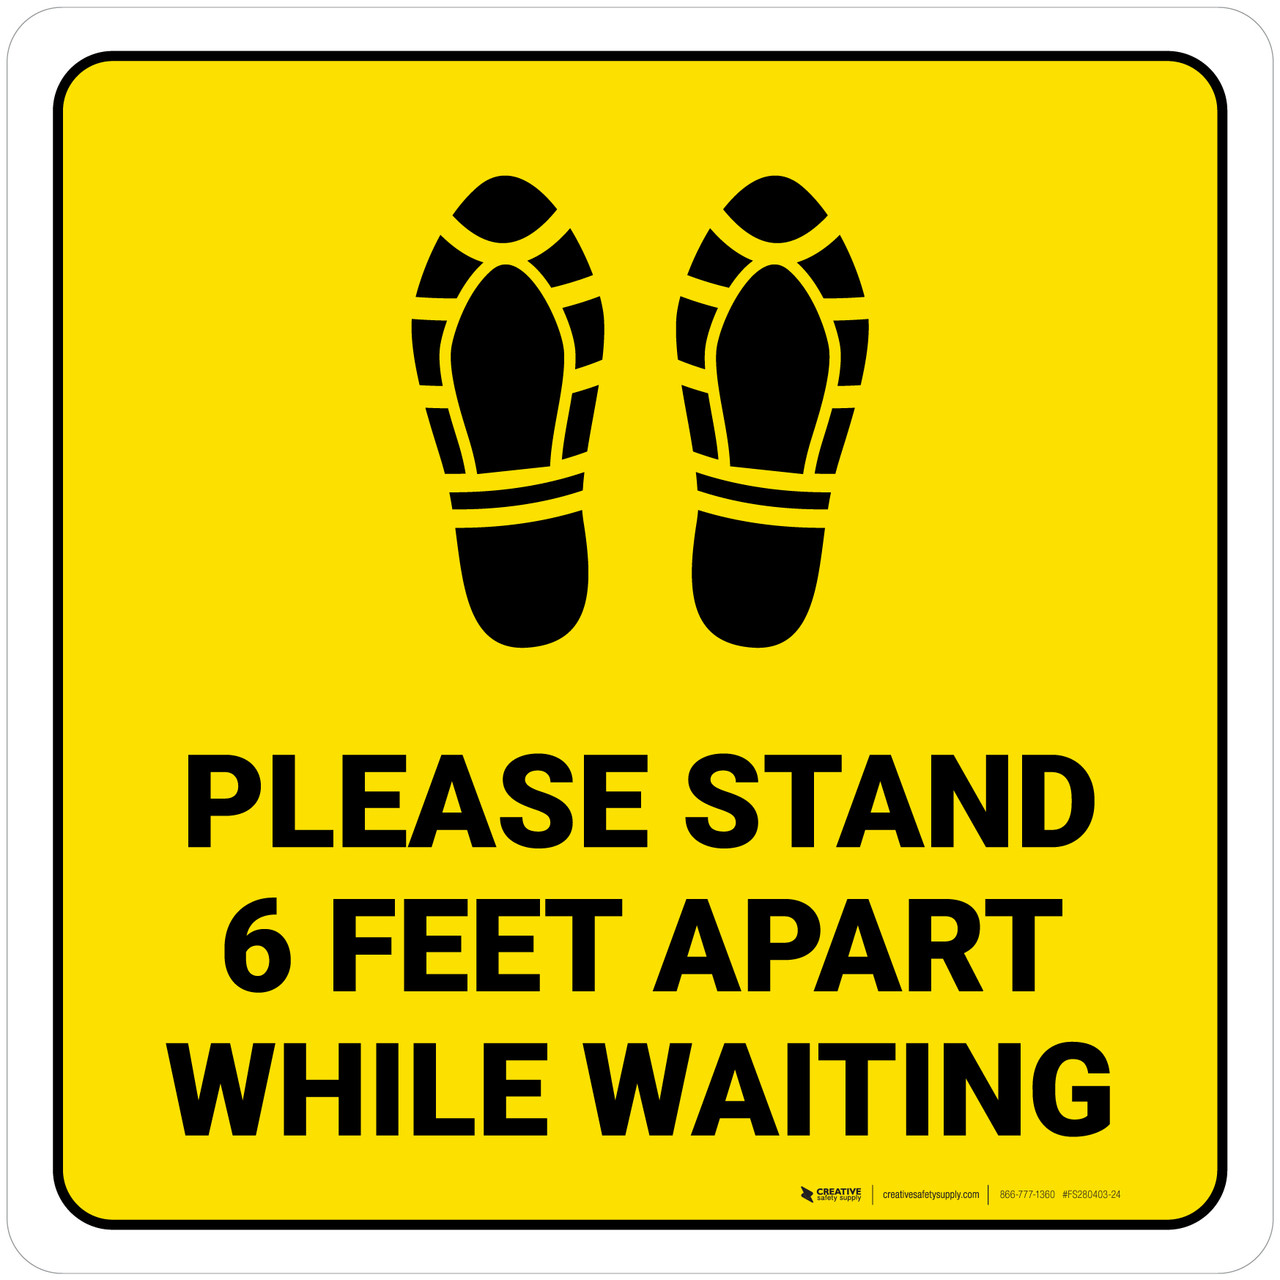 Please Stand Feet Apart While Waiting Shoe Prints Yellow Square 5S Today